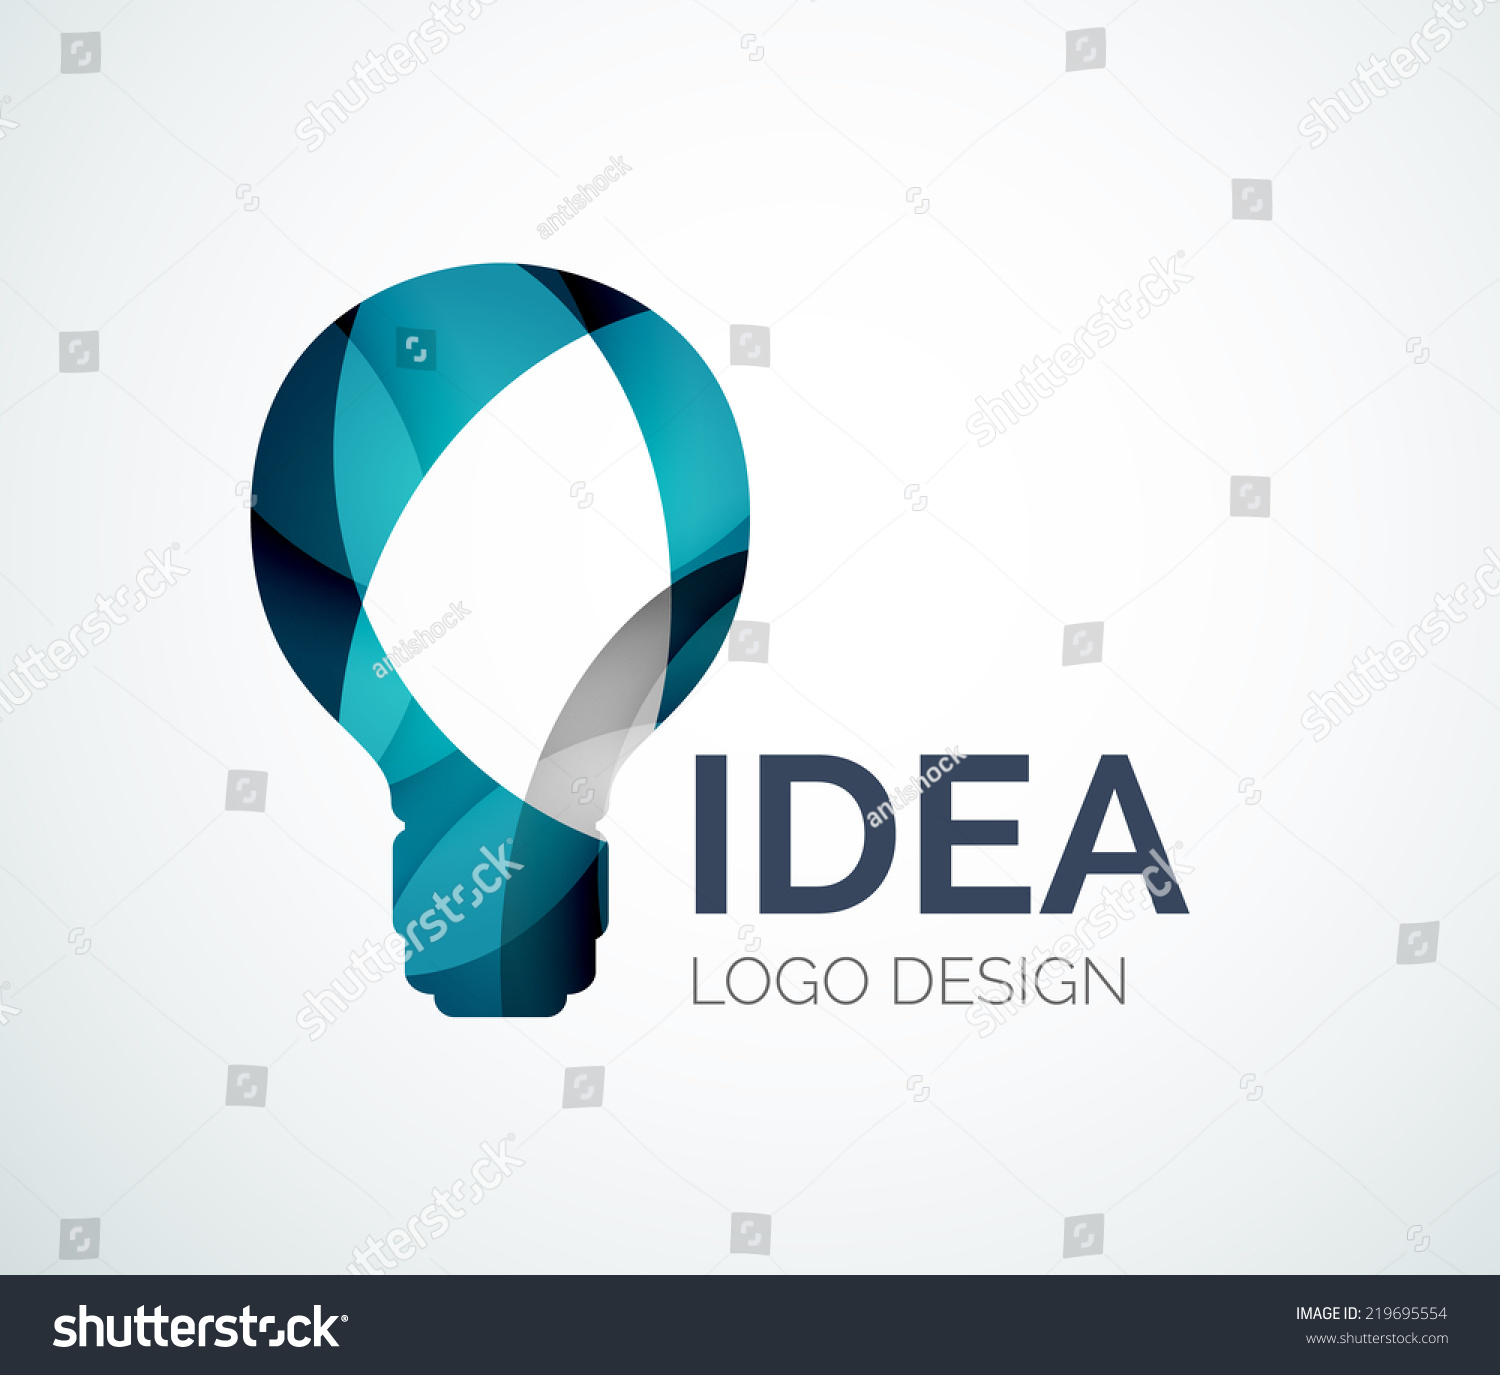 Abstract light bulb logo design made of color pieces  various 